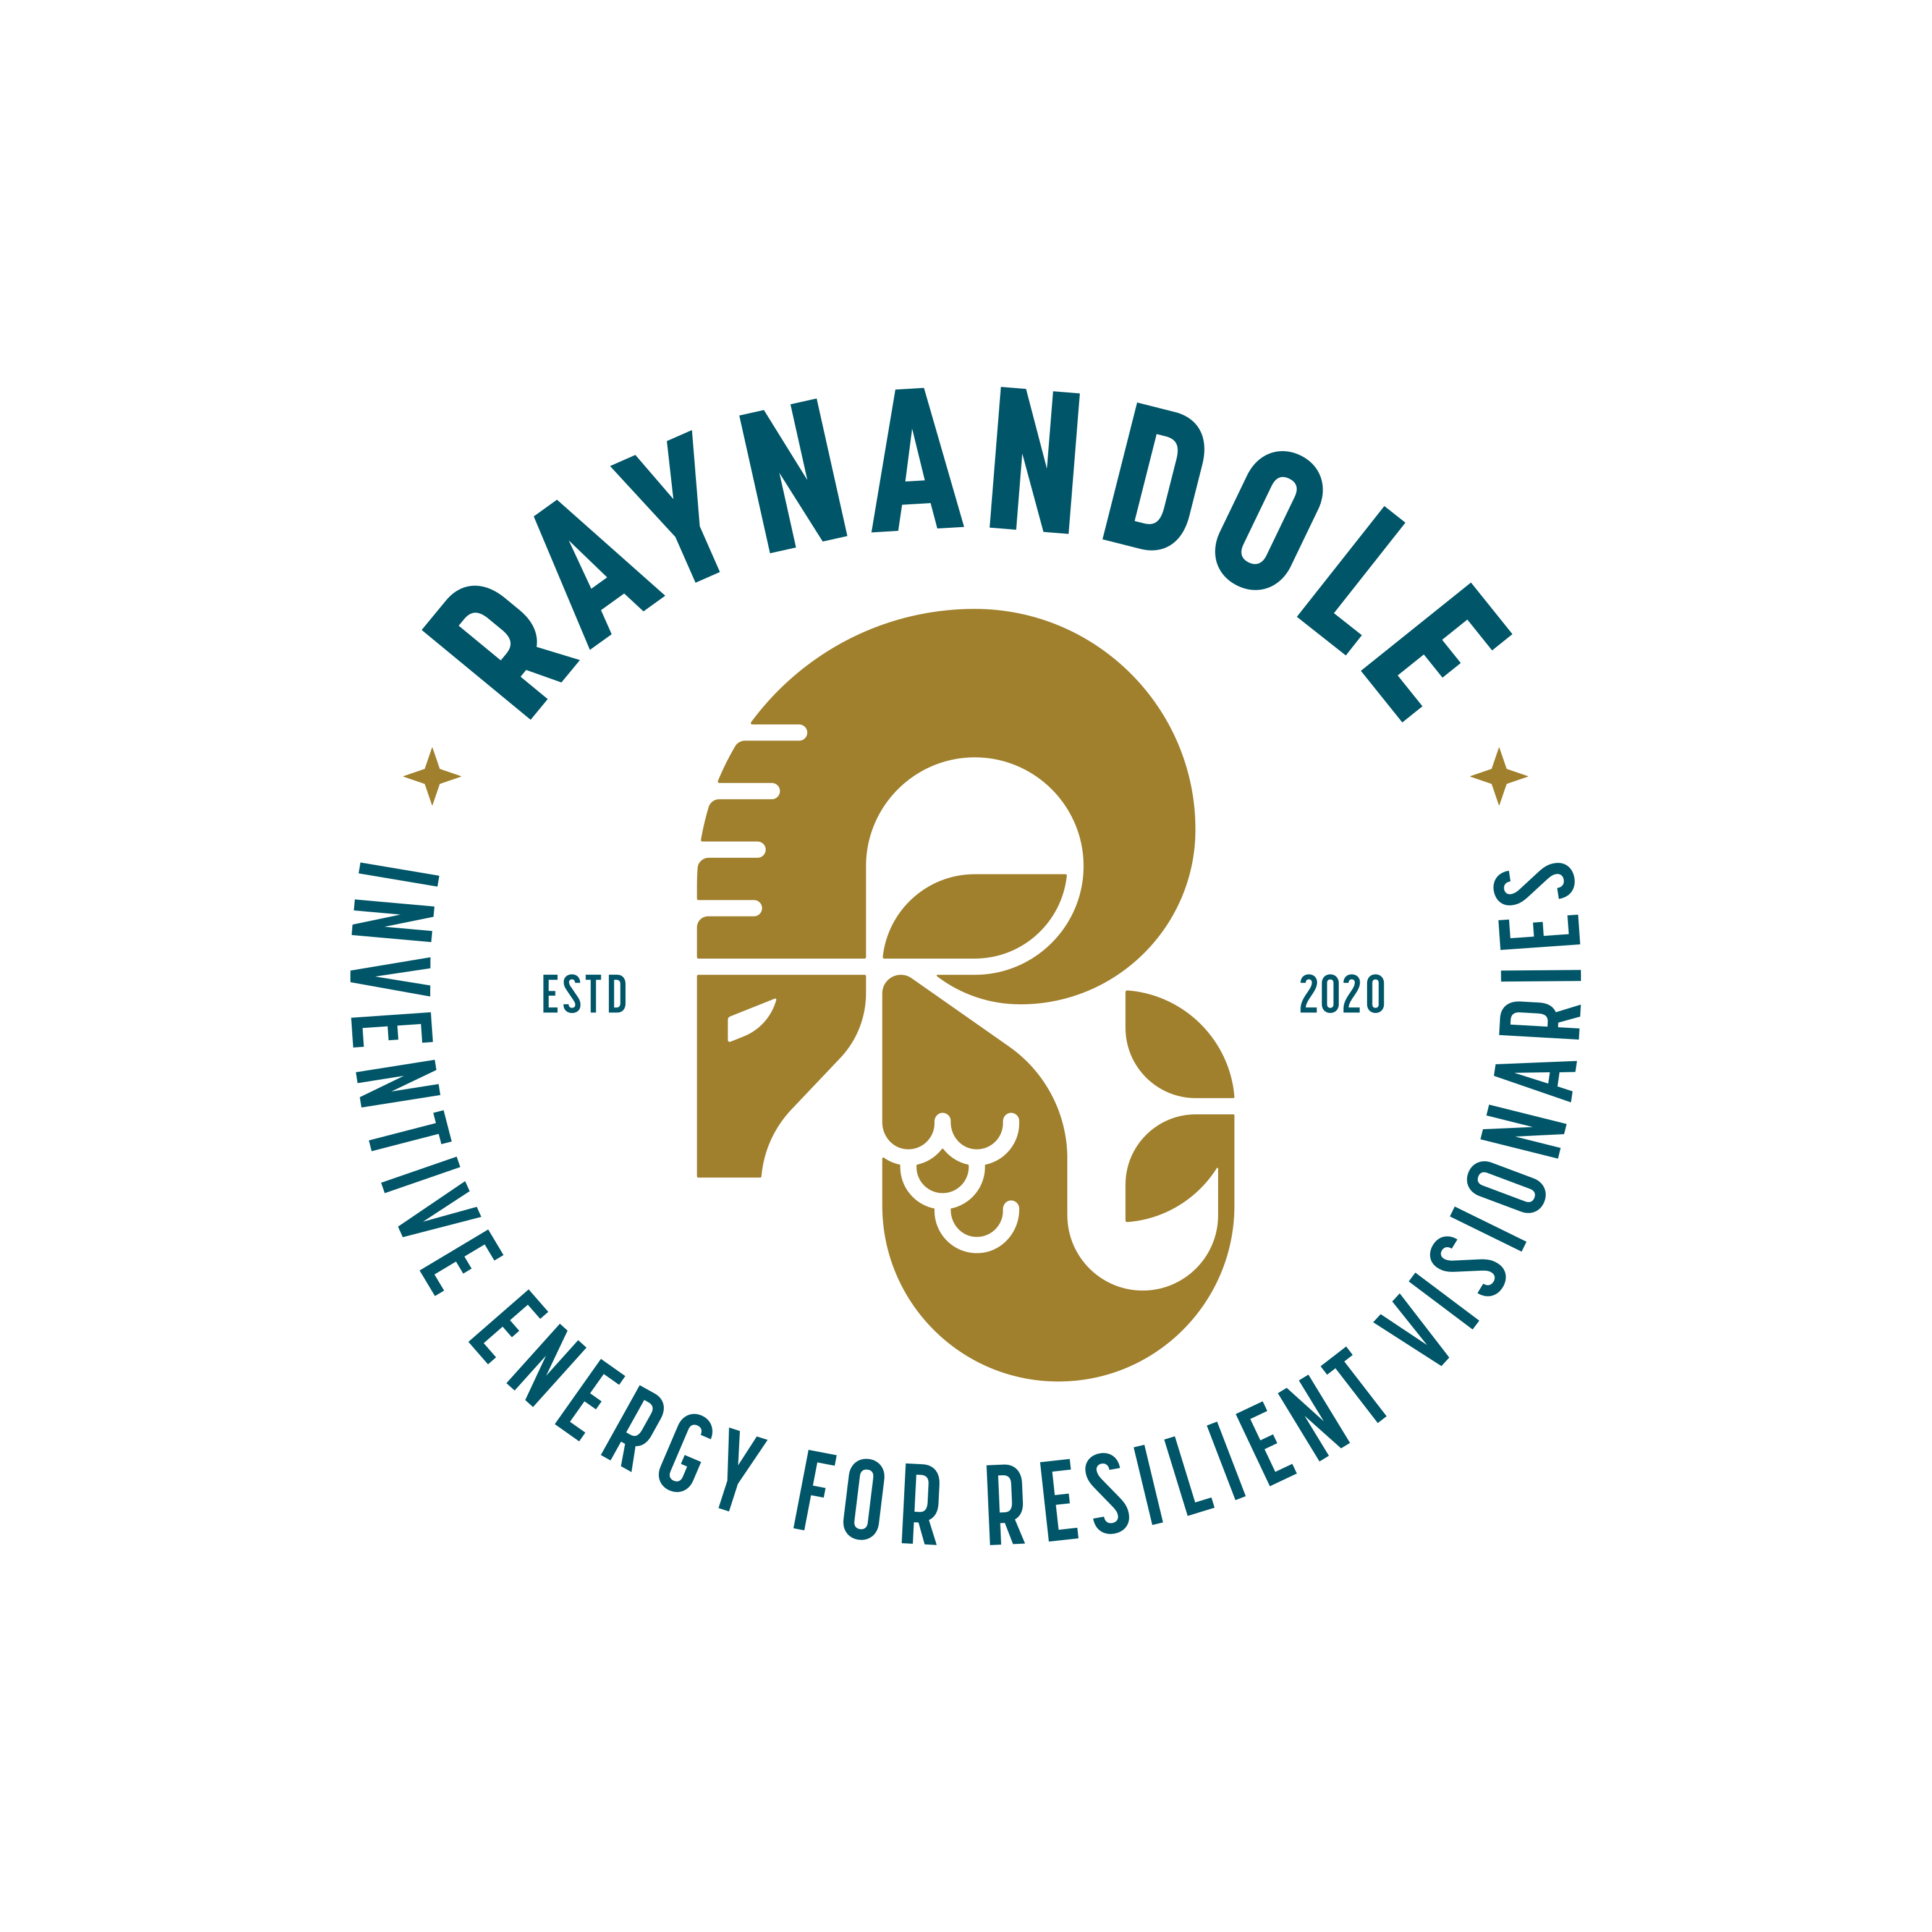 Raynandole logo design by logo designer Glitschka Studios for your inspiration and for the worlds largest logo competition